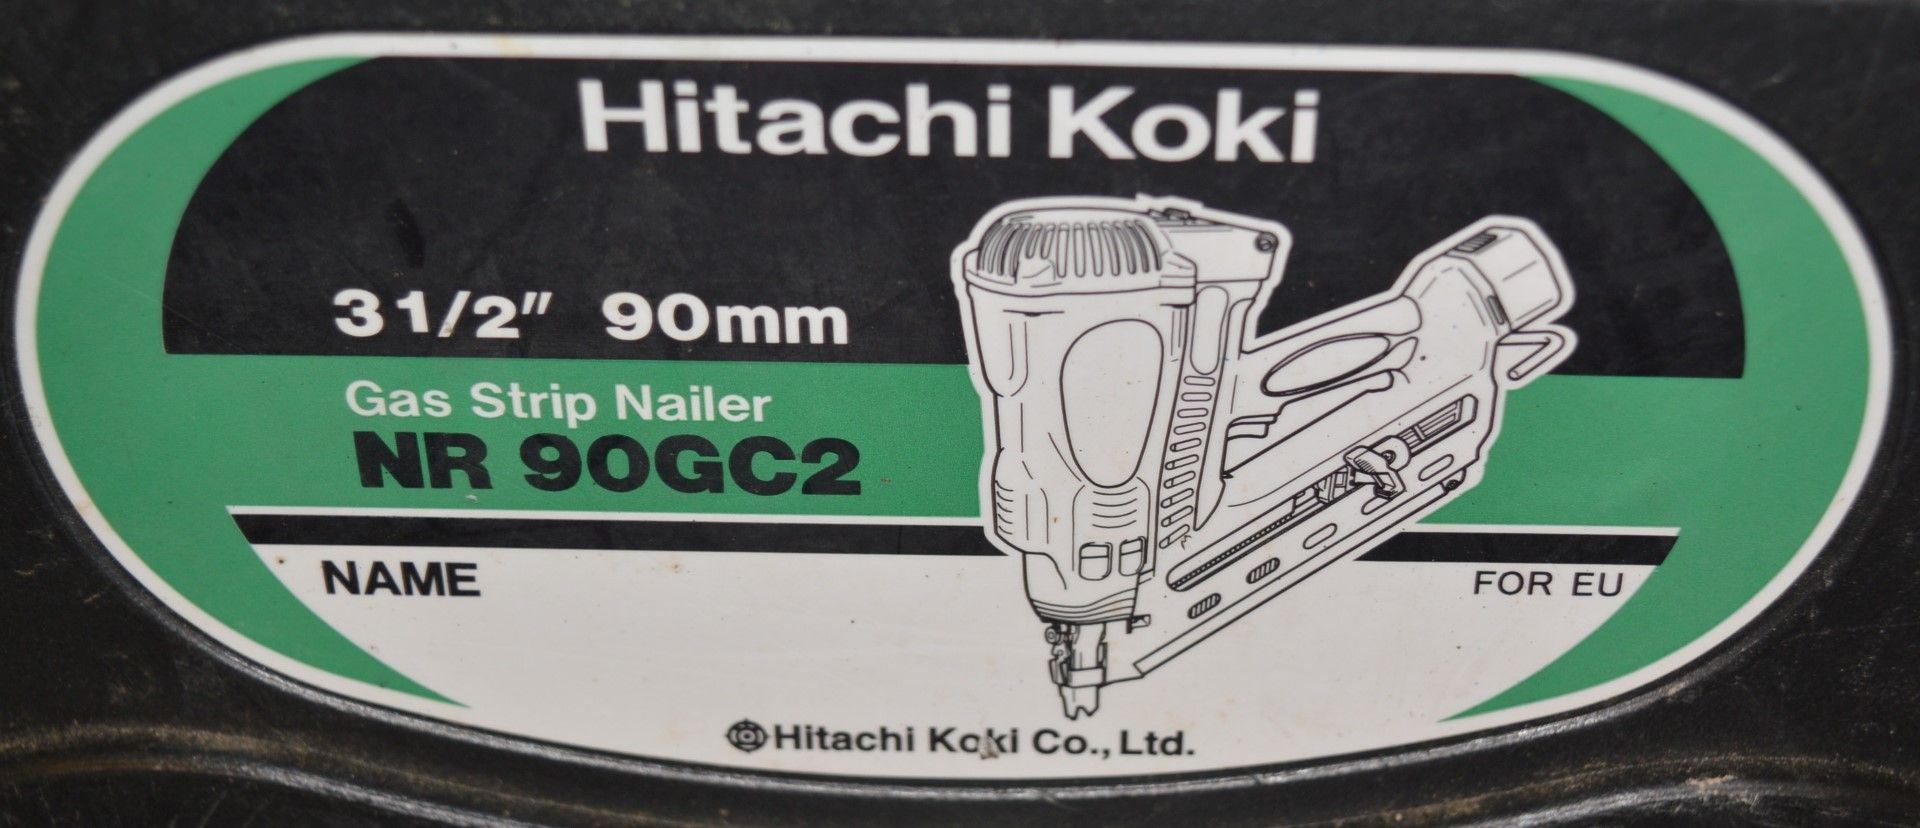 1 x Hitachi Koki NR90GC2 90mm Gas Strip Nail Gun - Includes Case, Charger and Two Batteries - Ref: - Image 2 of 9